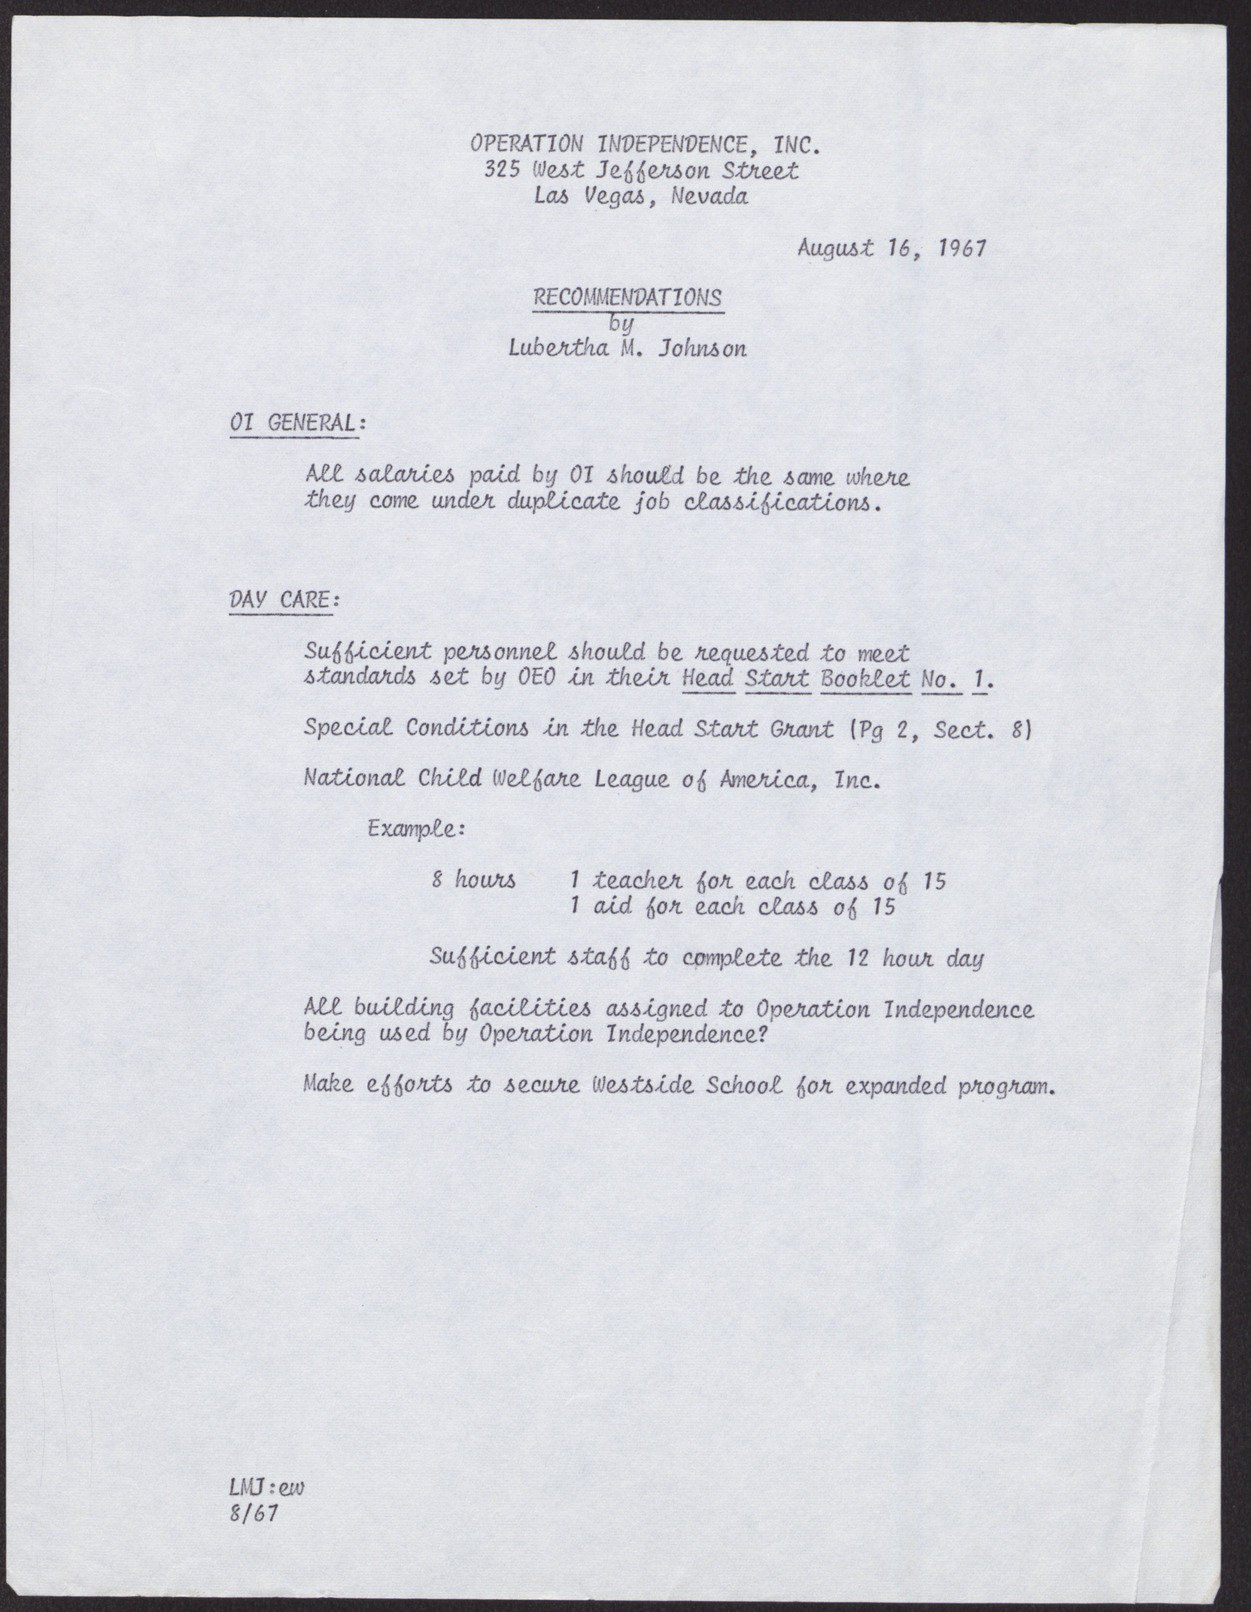 Minutes from an Operation Independence, Inc. Executive Committee Meeting (4 pages), August 16, 1967